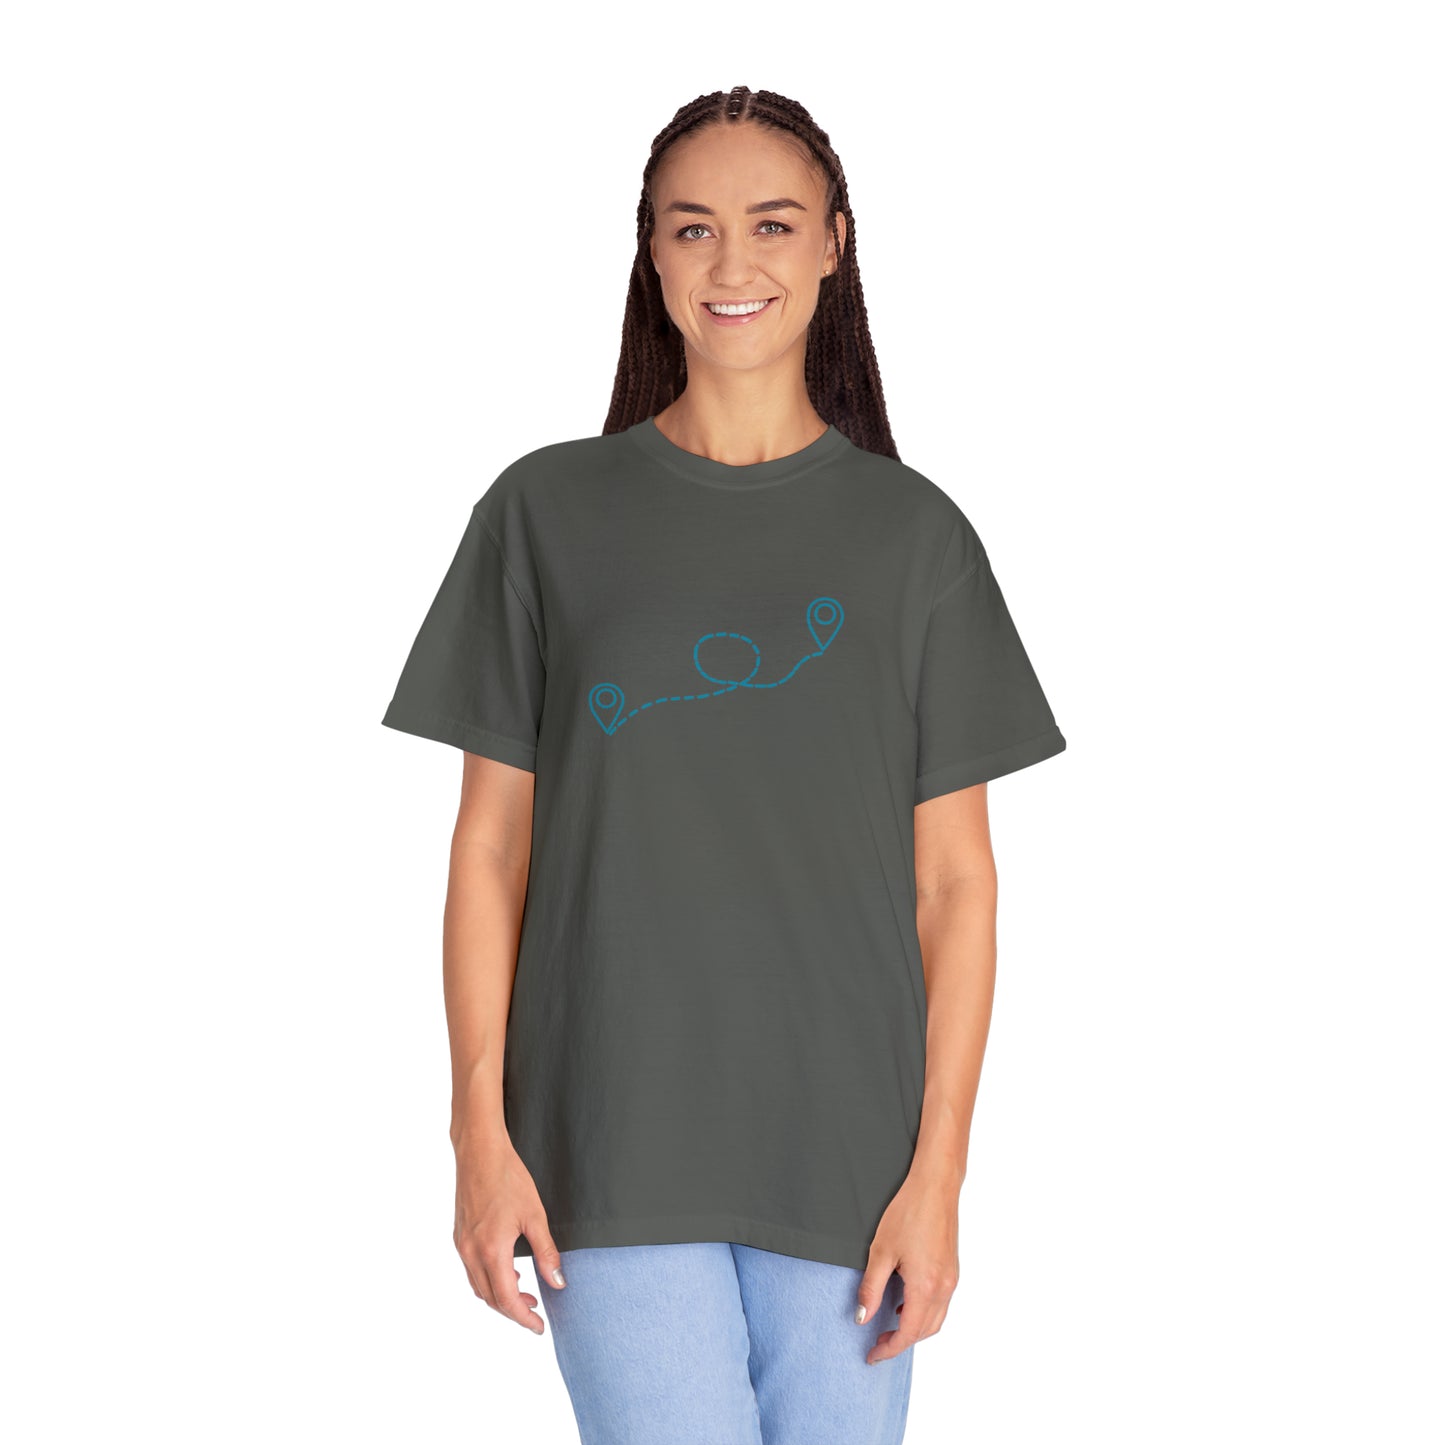 You'll Get There Eventually Location T-shirt